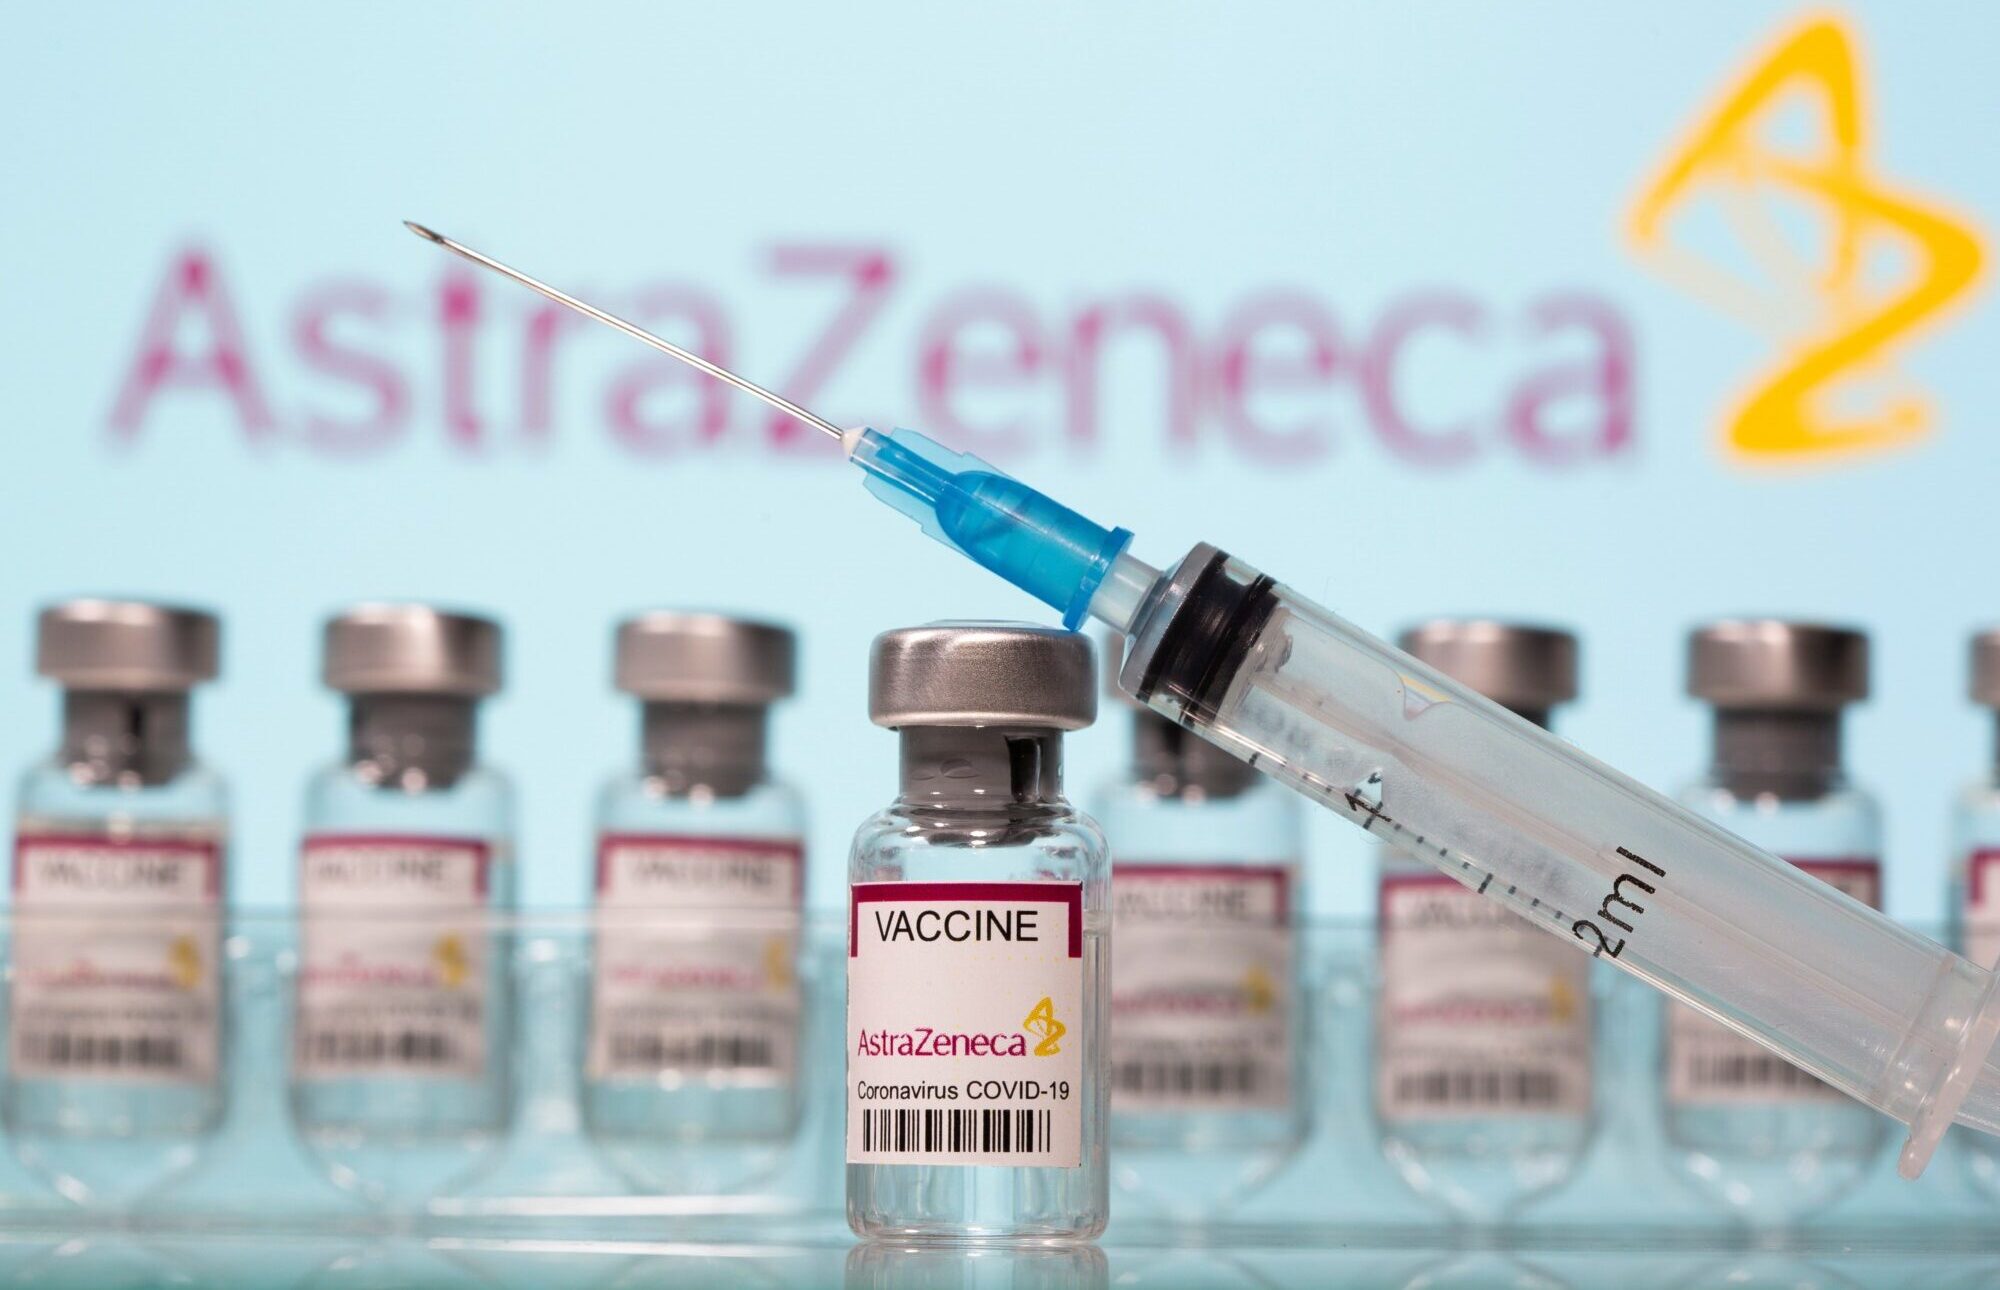 Denmark, Norway, Iceland Suspend AstraZeneca COVID Shots After Blood Clot Reports